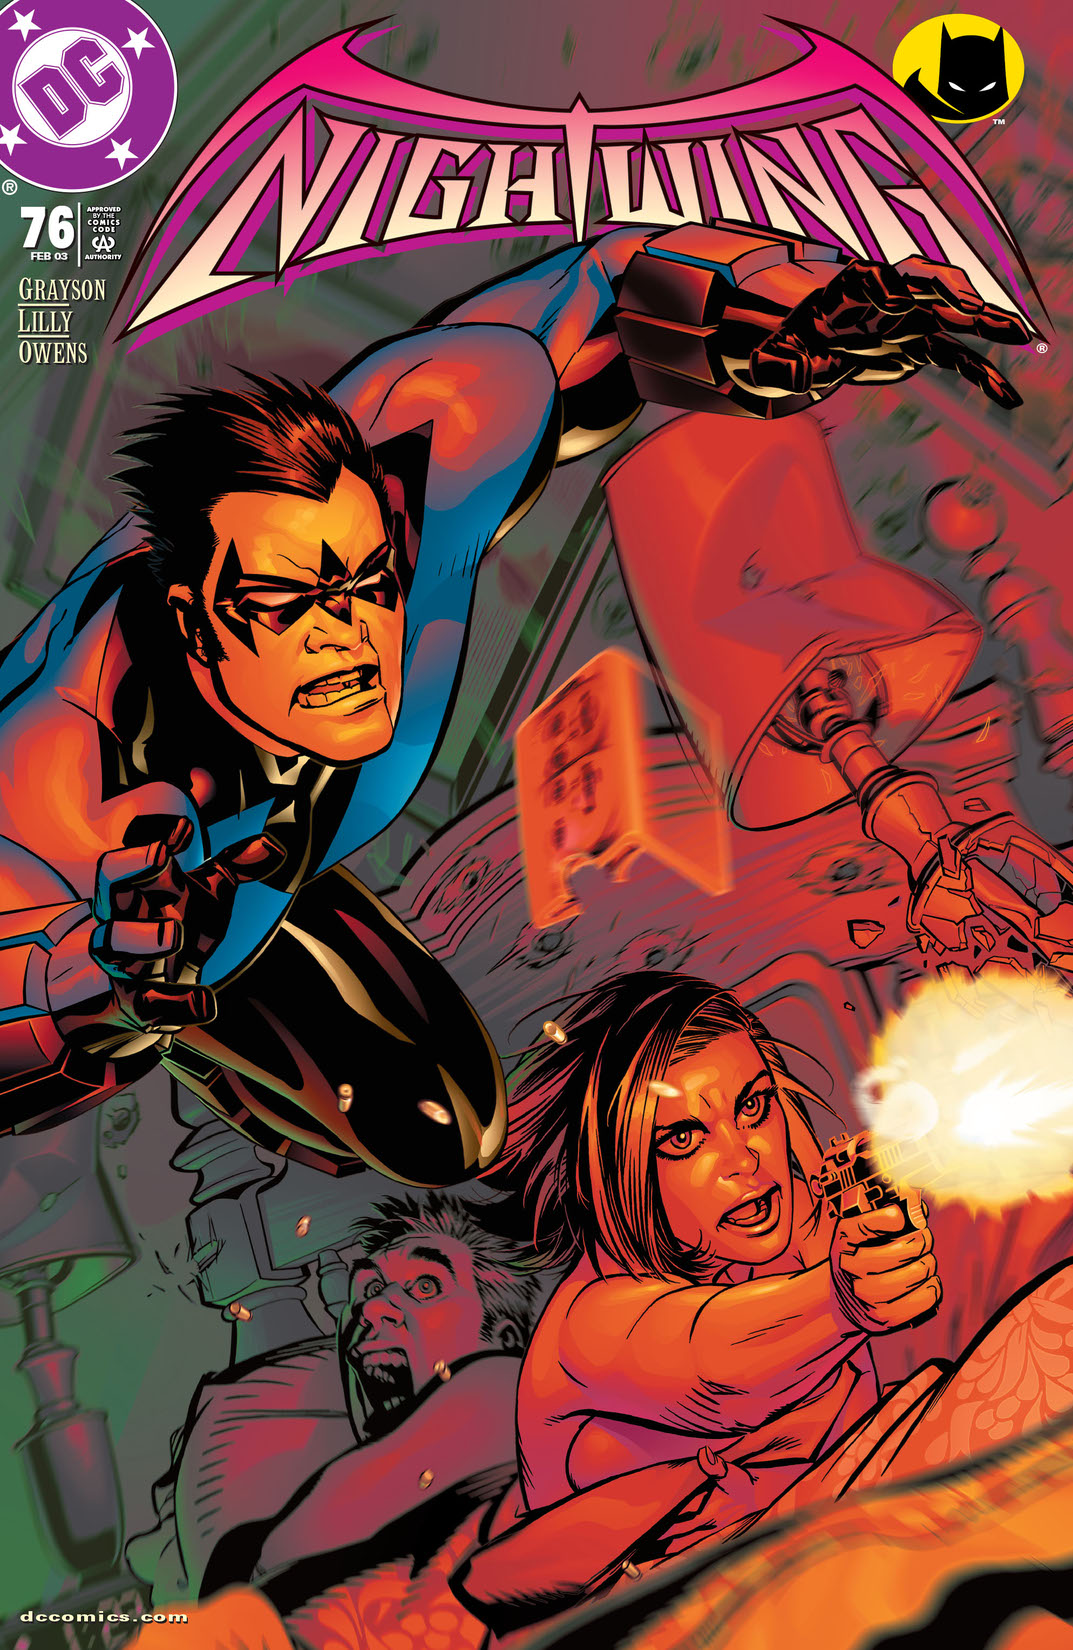 Nightwing (1996-) #76 preview images